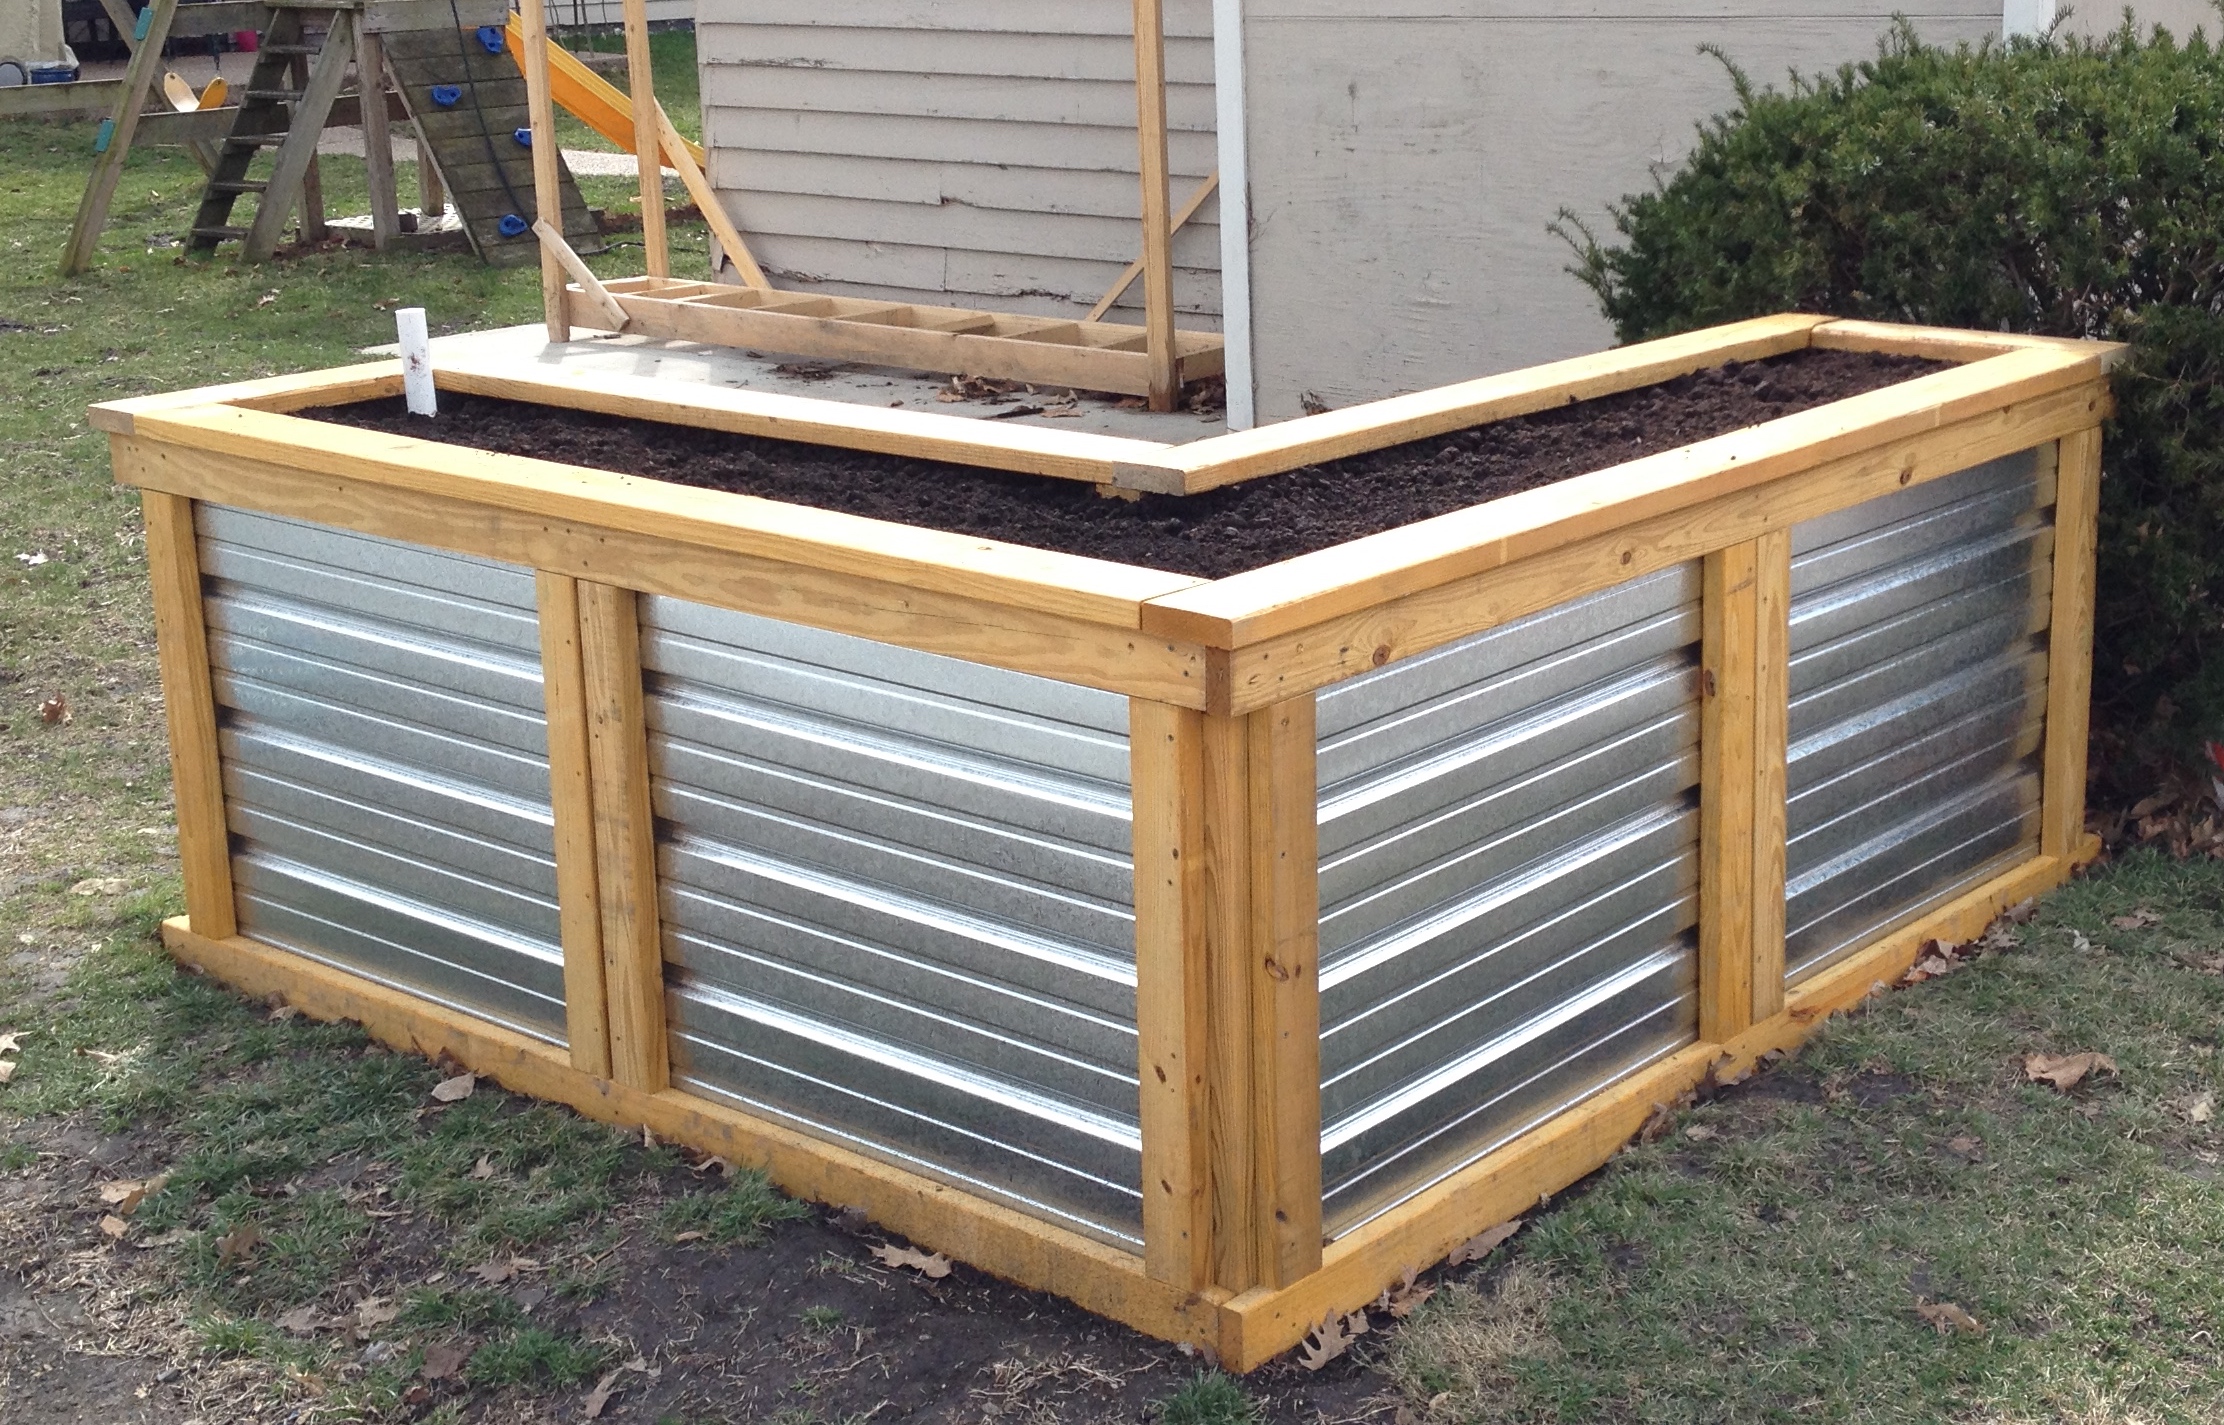 How To Build Raised Garden Beds Cheap Raised Garden Beds